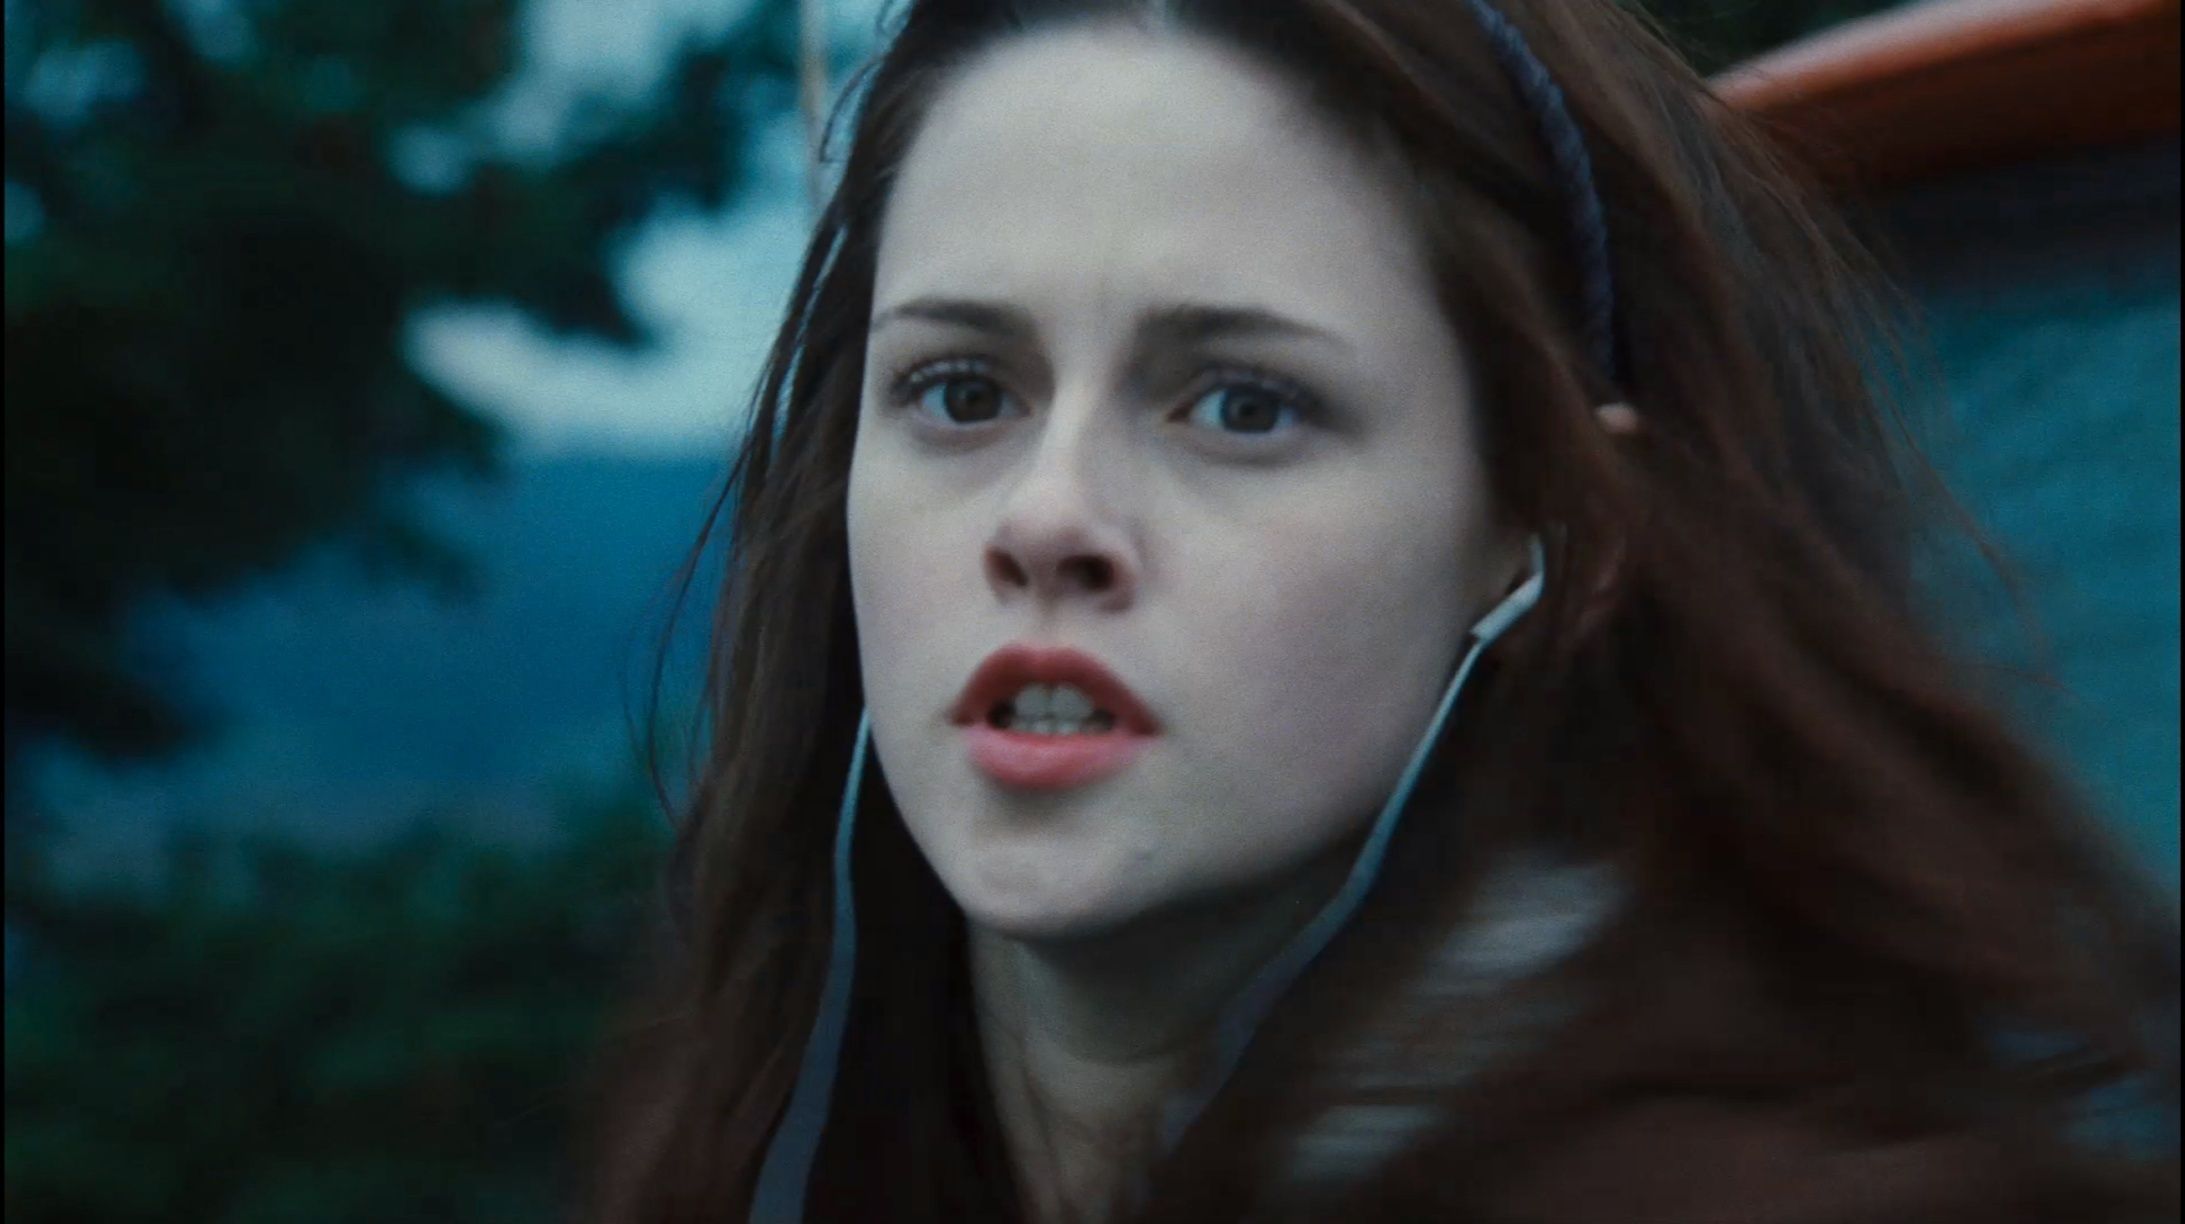 Twilight: 17 Actors Who Loved Making The Movies (And 3 Who Didn't)